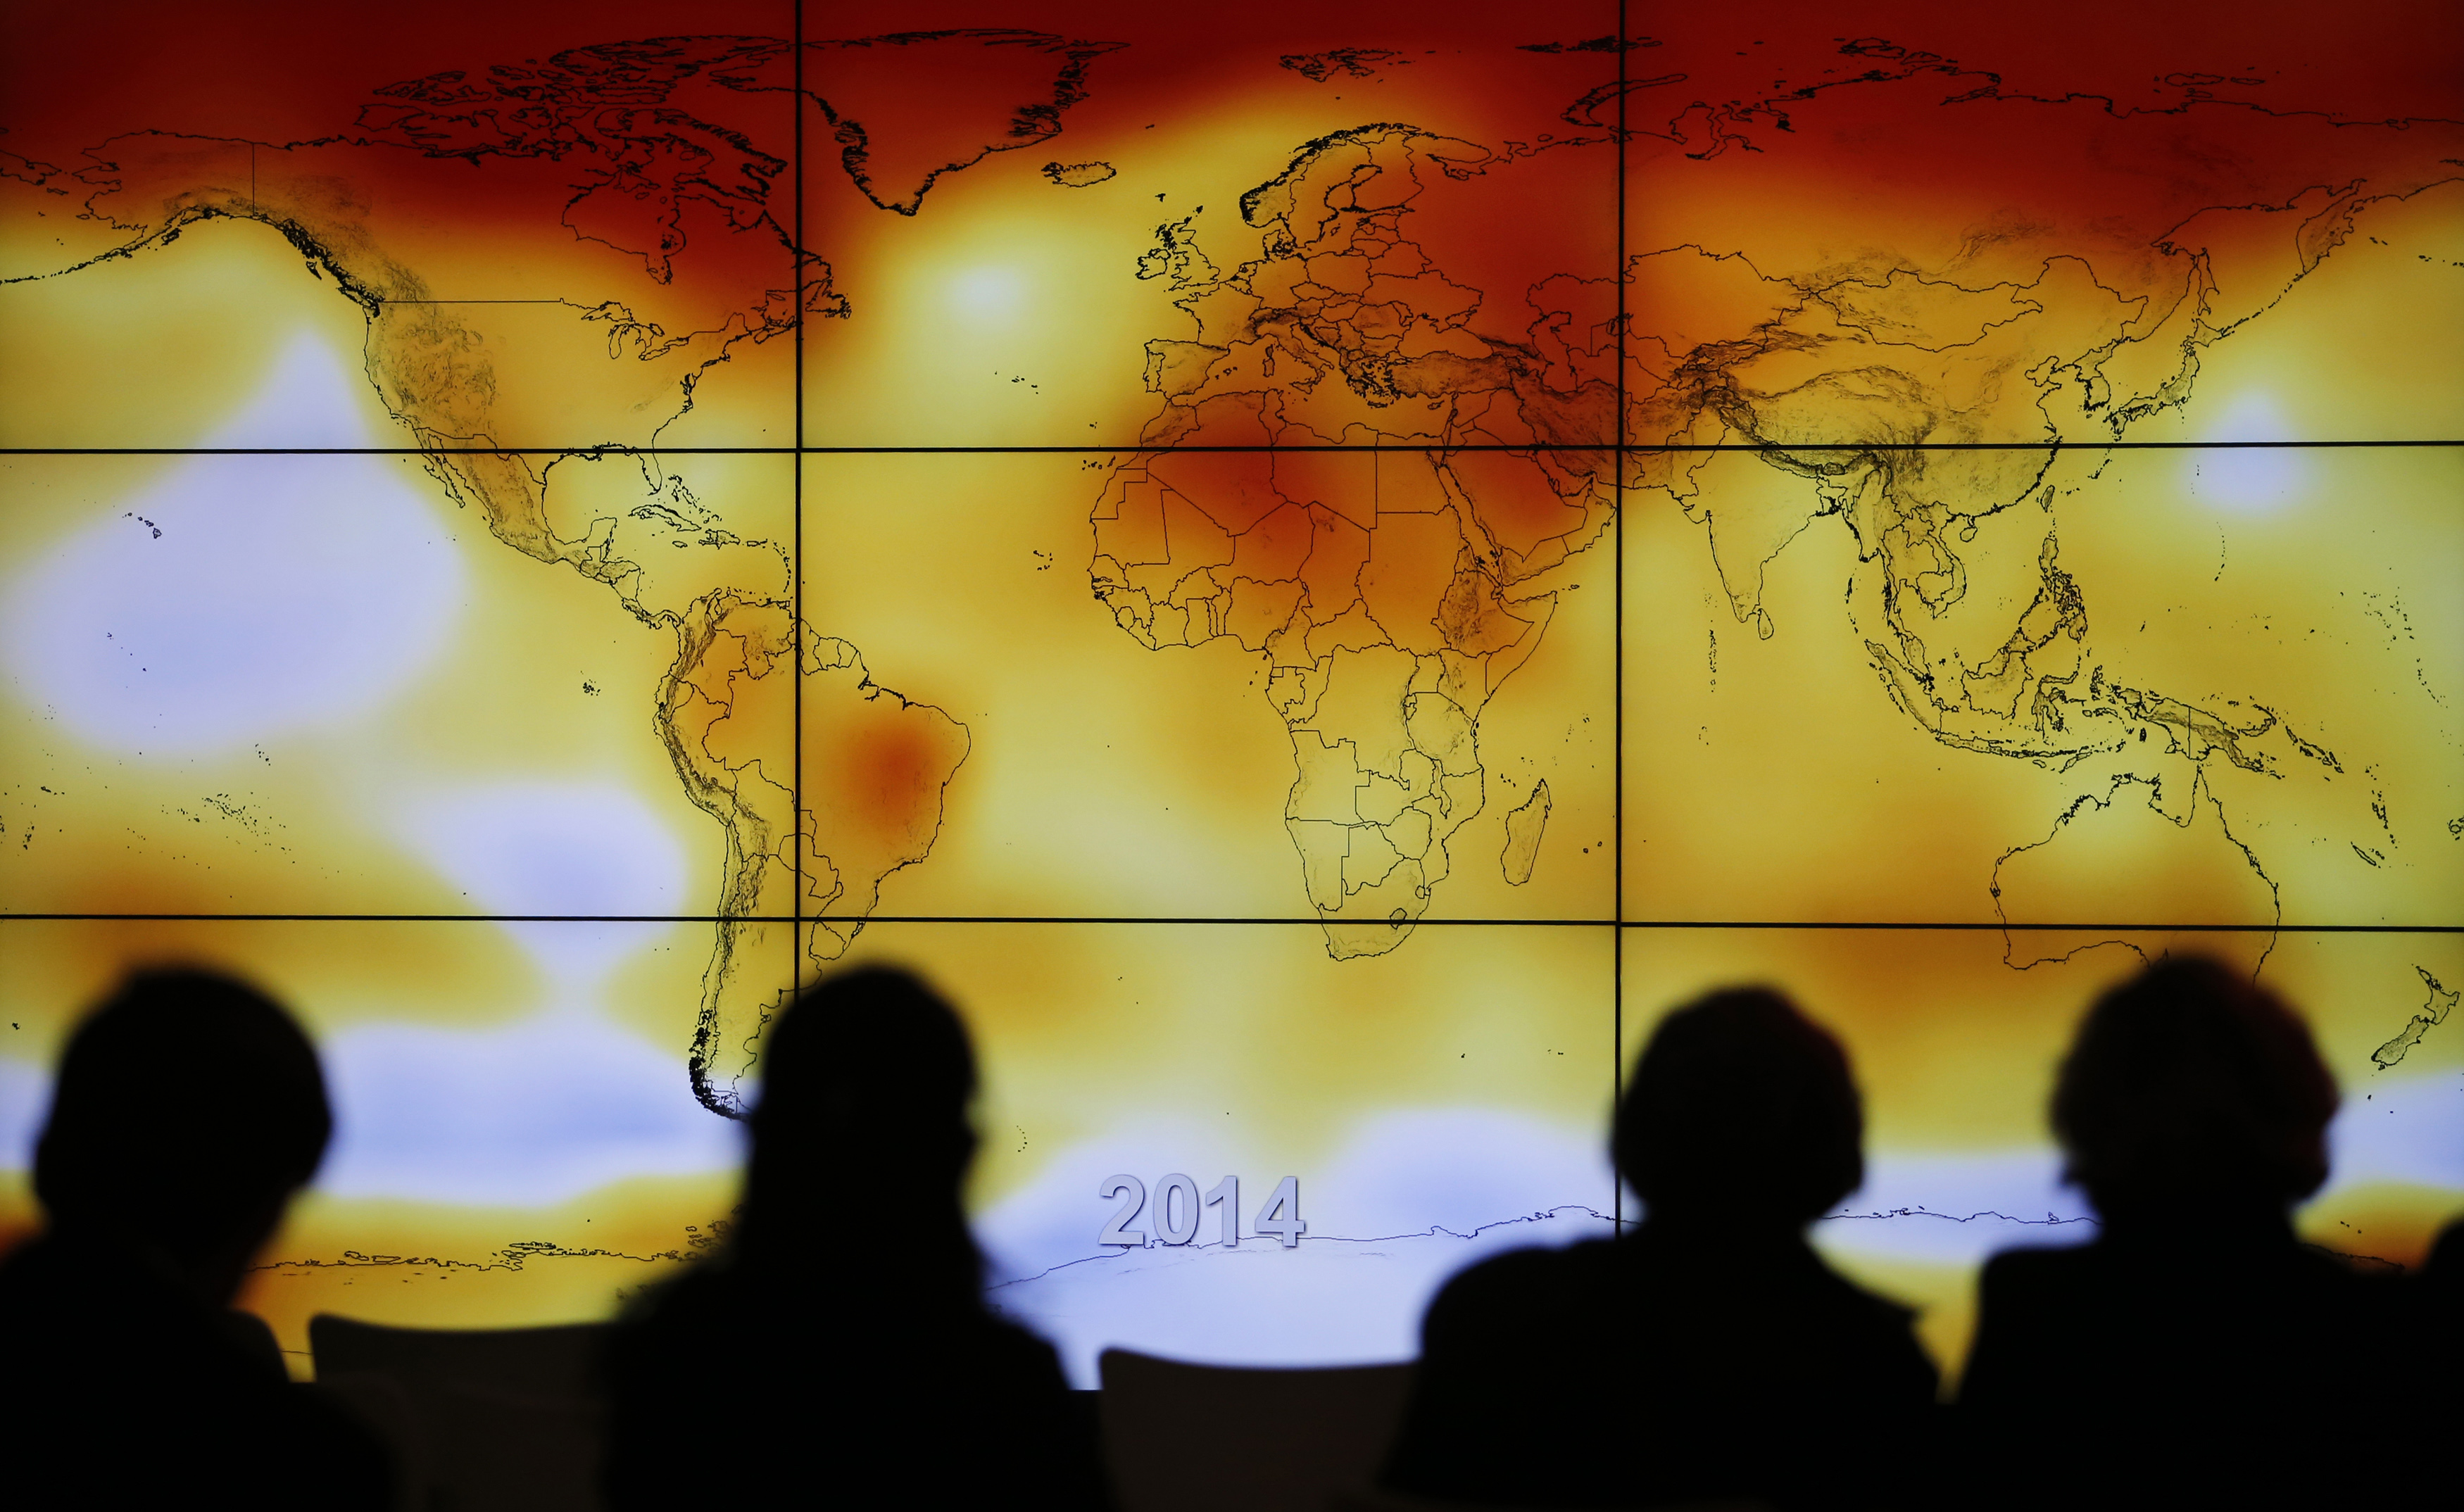 Participants are seen in silhouette as they look at a screen showing a world map with climate anomalies during the World Climate Change Conference 2015 (COP21) at Le Bourget, near Paris, Dec 8, 2015. (Stephane Mahe—Reuters)